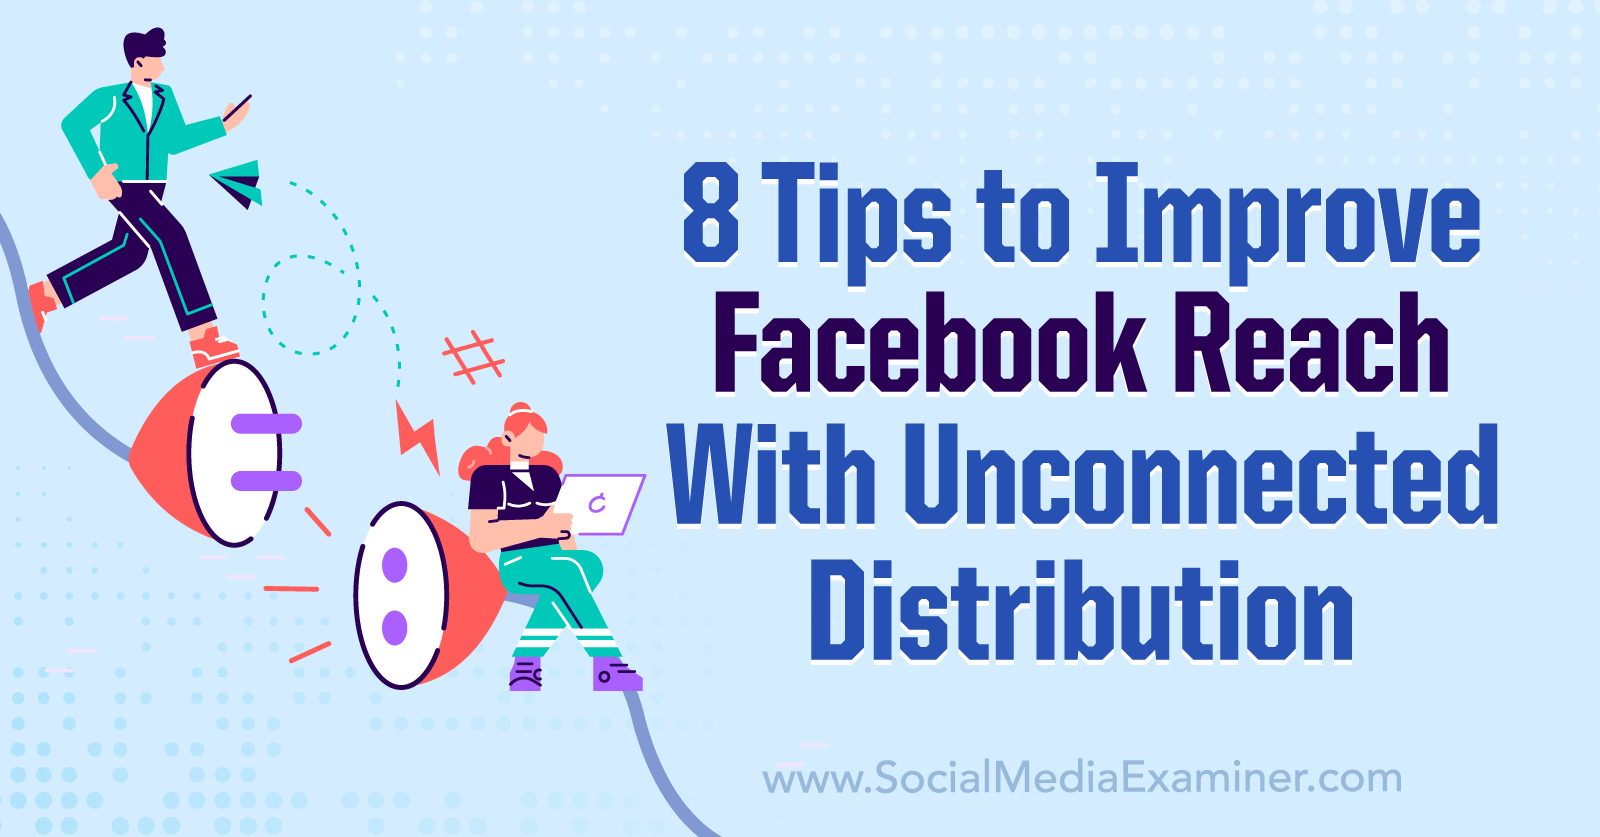 8 Tips to Improve Facebook Reach With Unconnected Distribution-Social Media Examiner